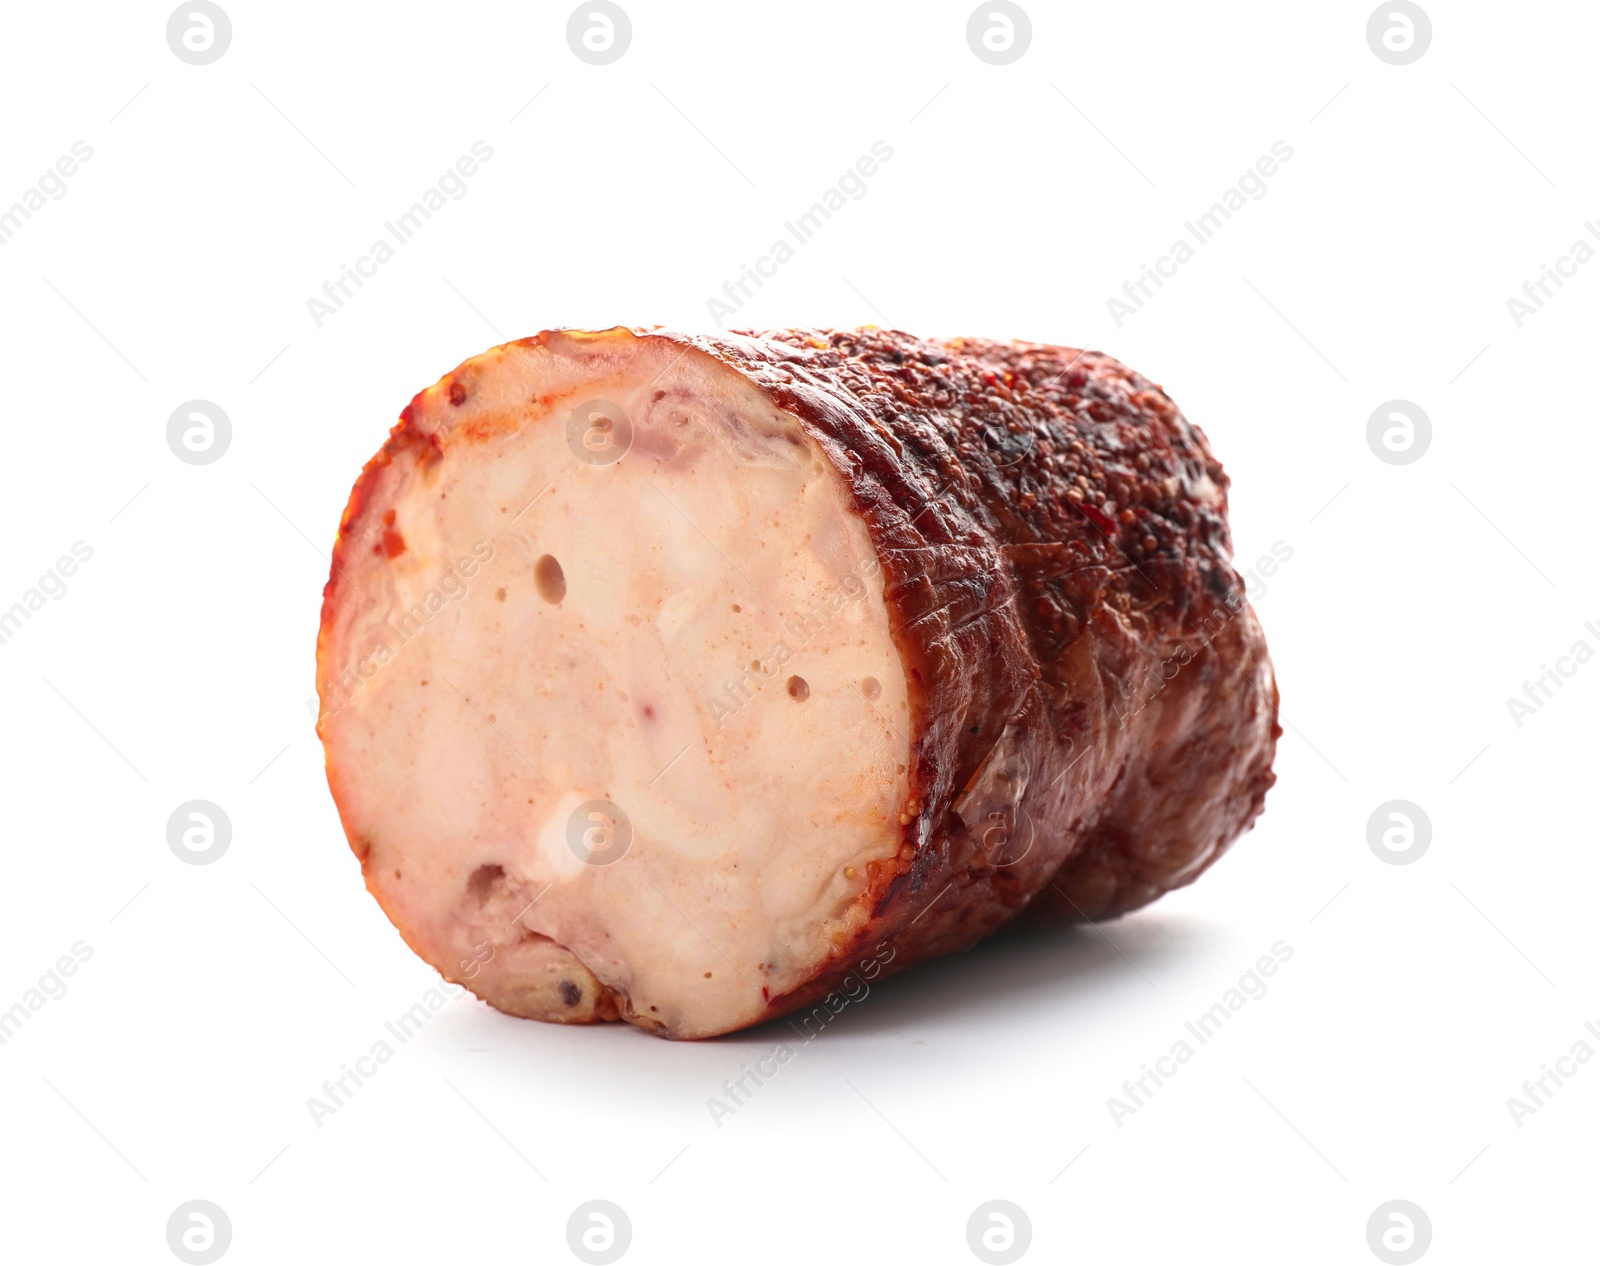 Photo of Cut ham on white background. Meat product